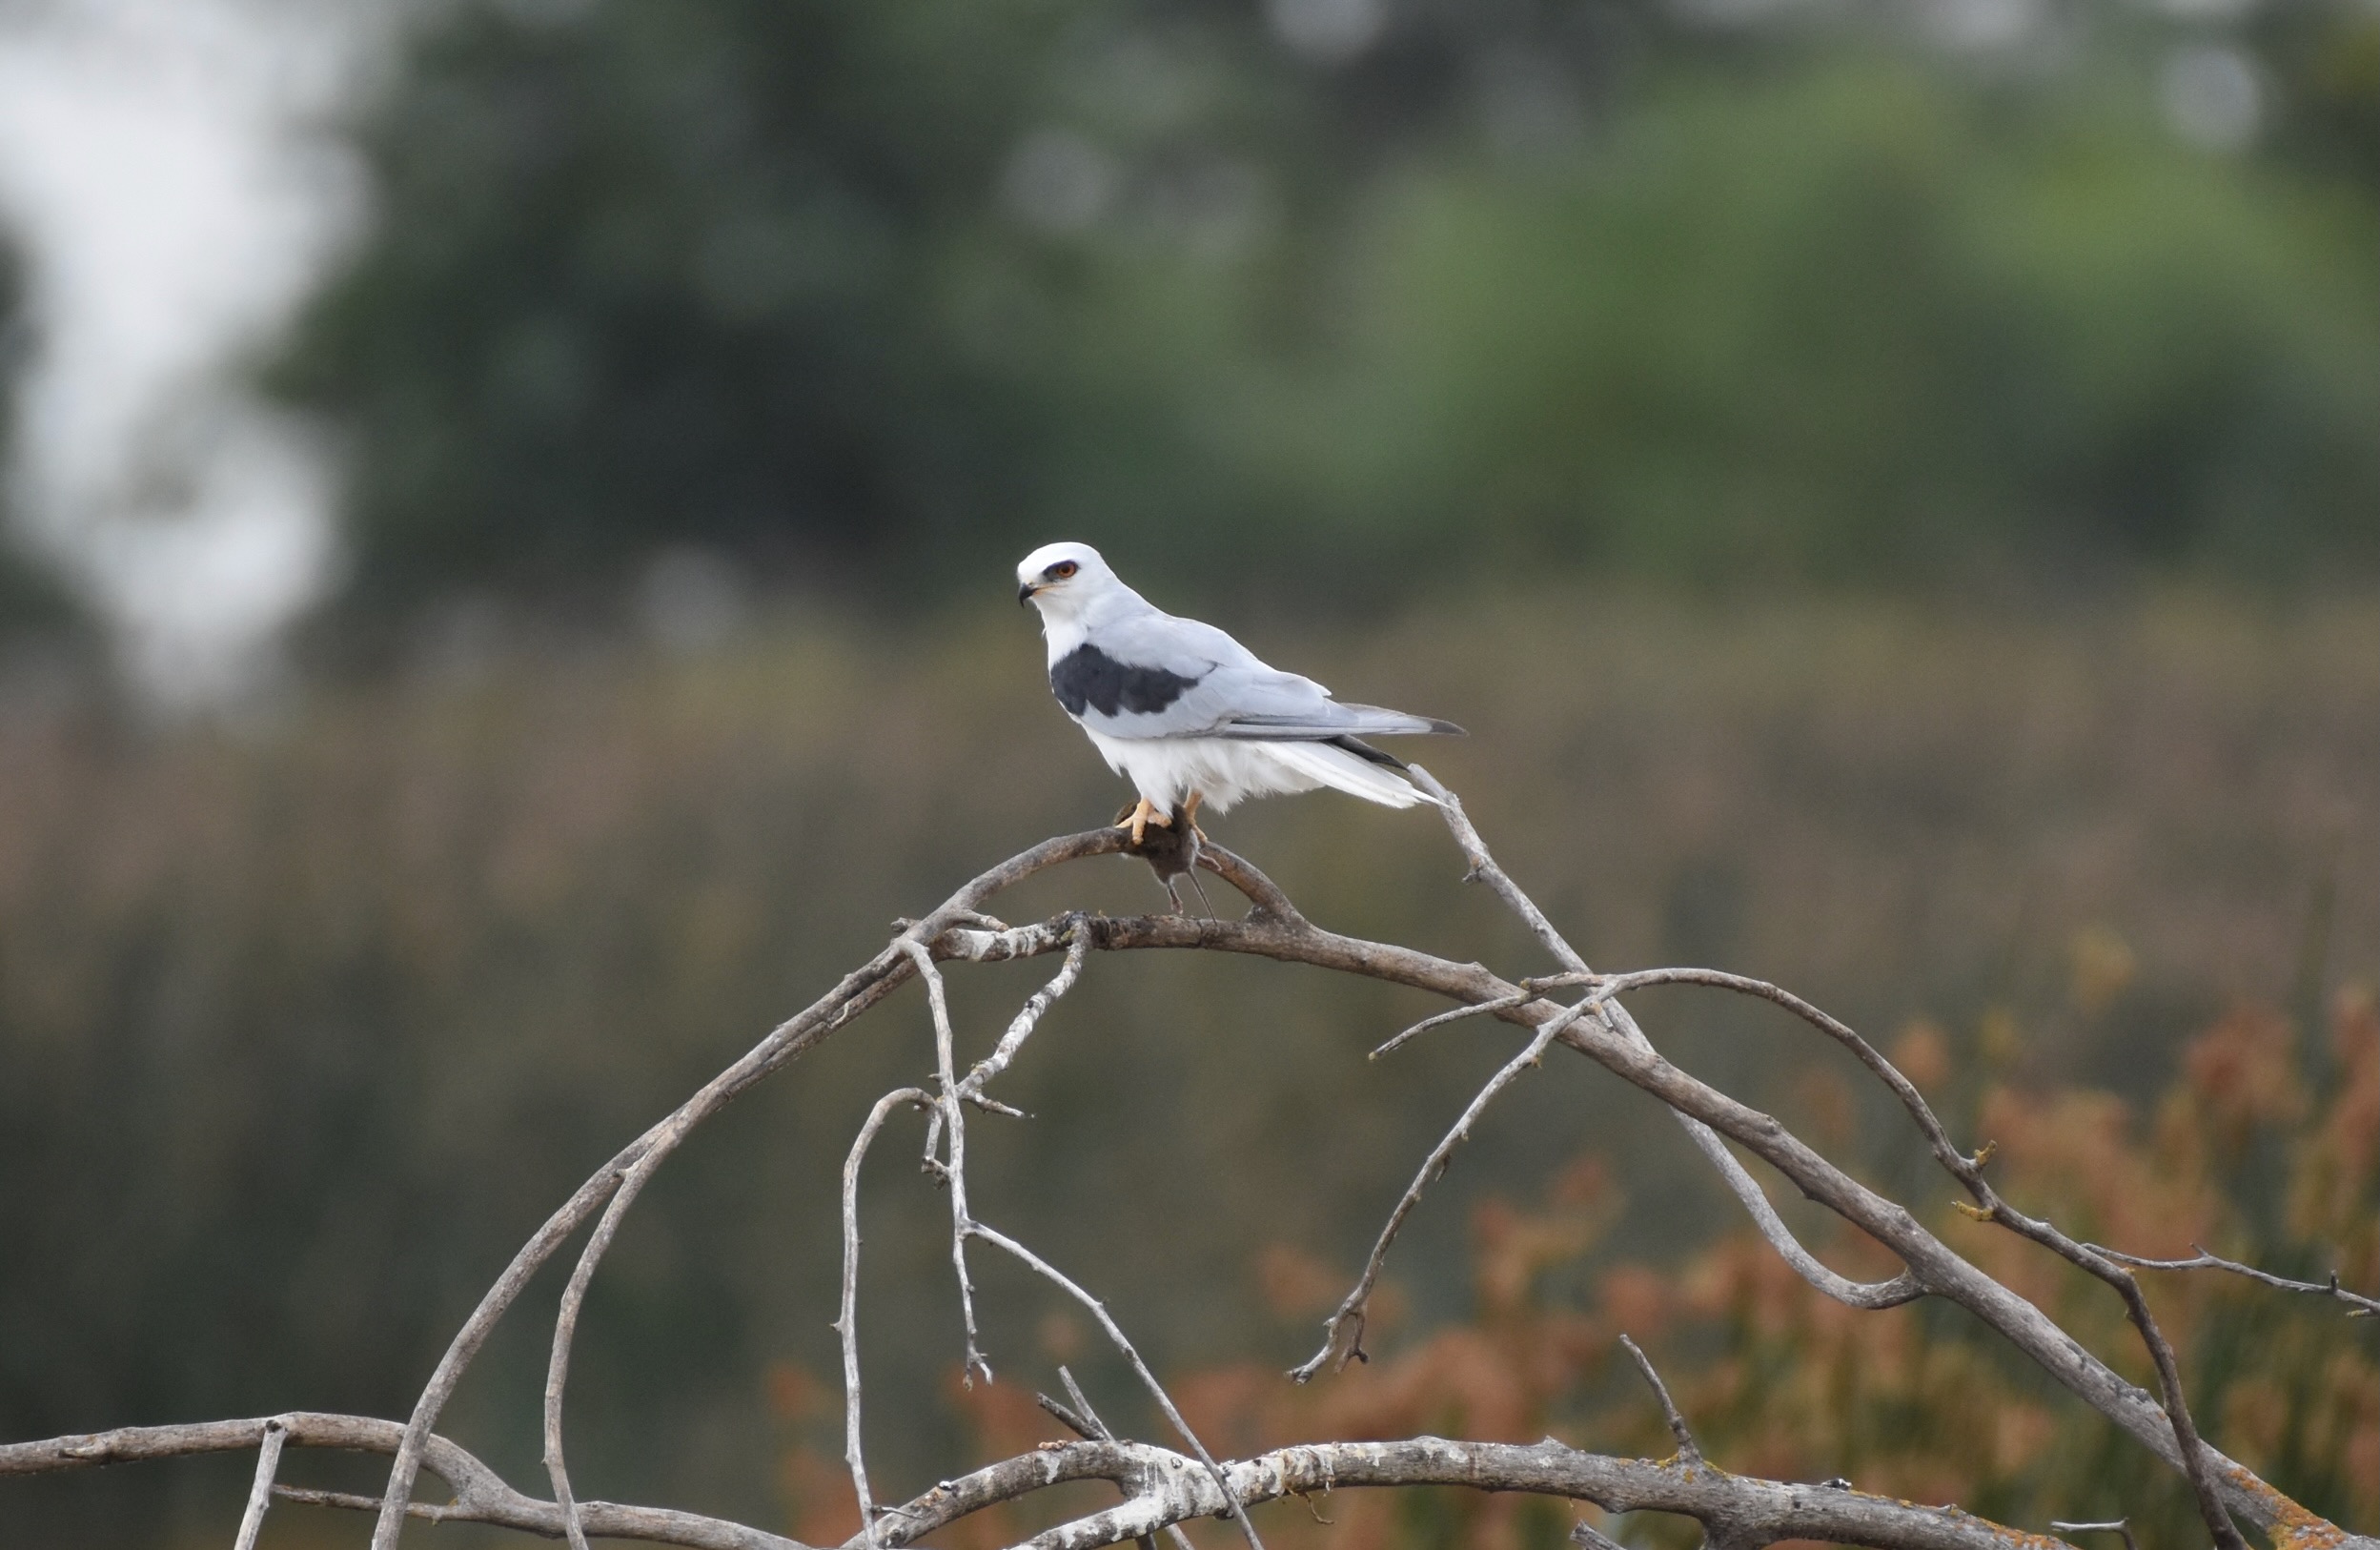 A photo of a Black-shouldered kite perched on a branch with prey in its clutches.